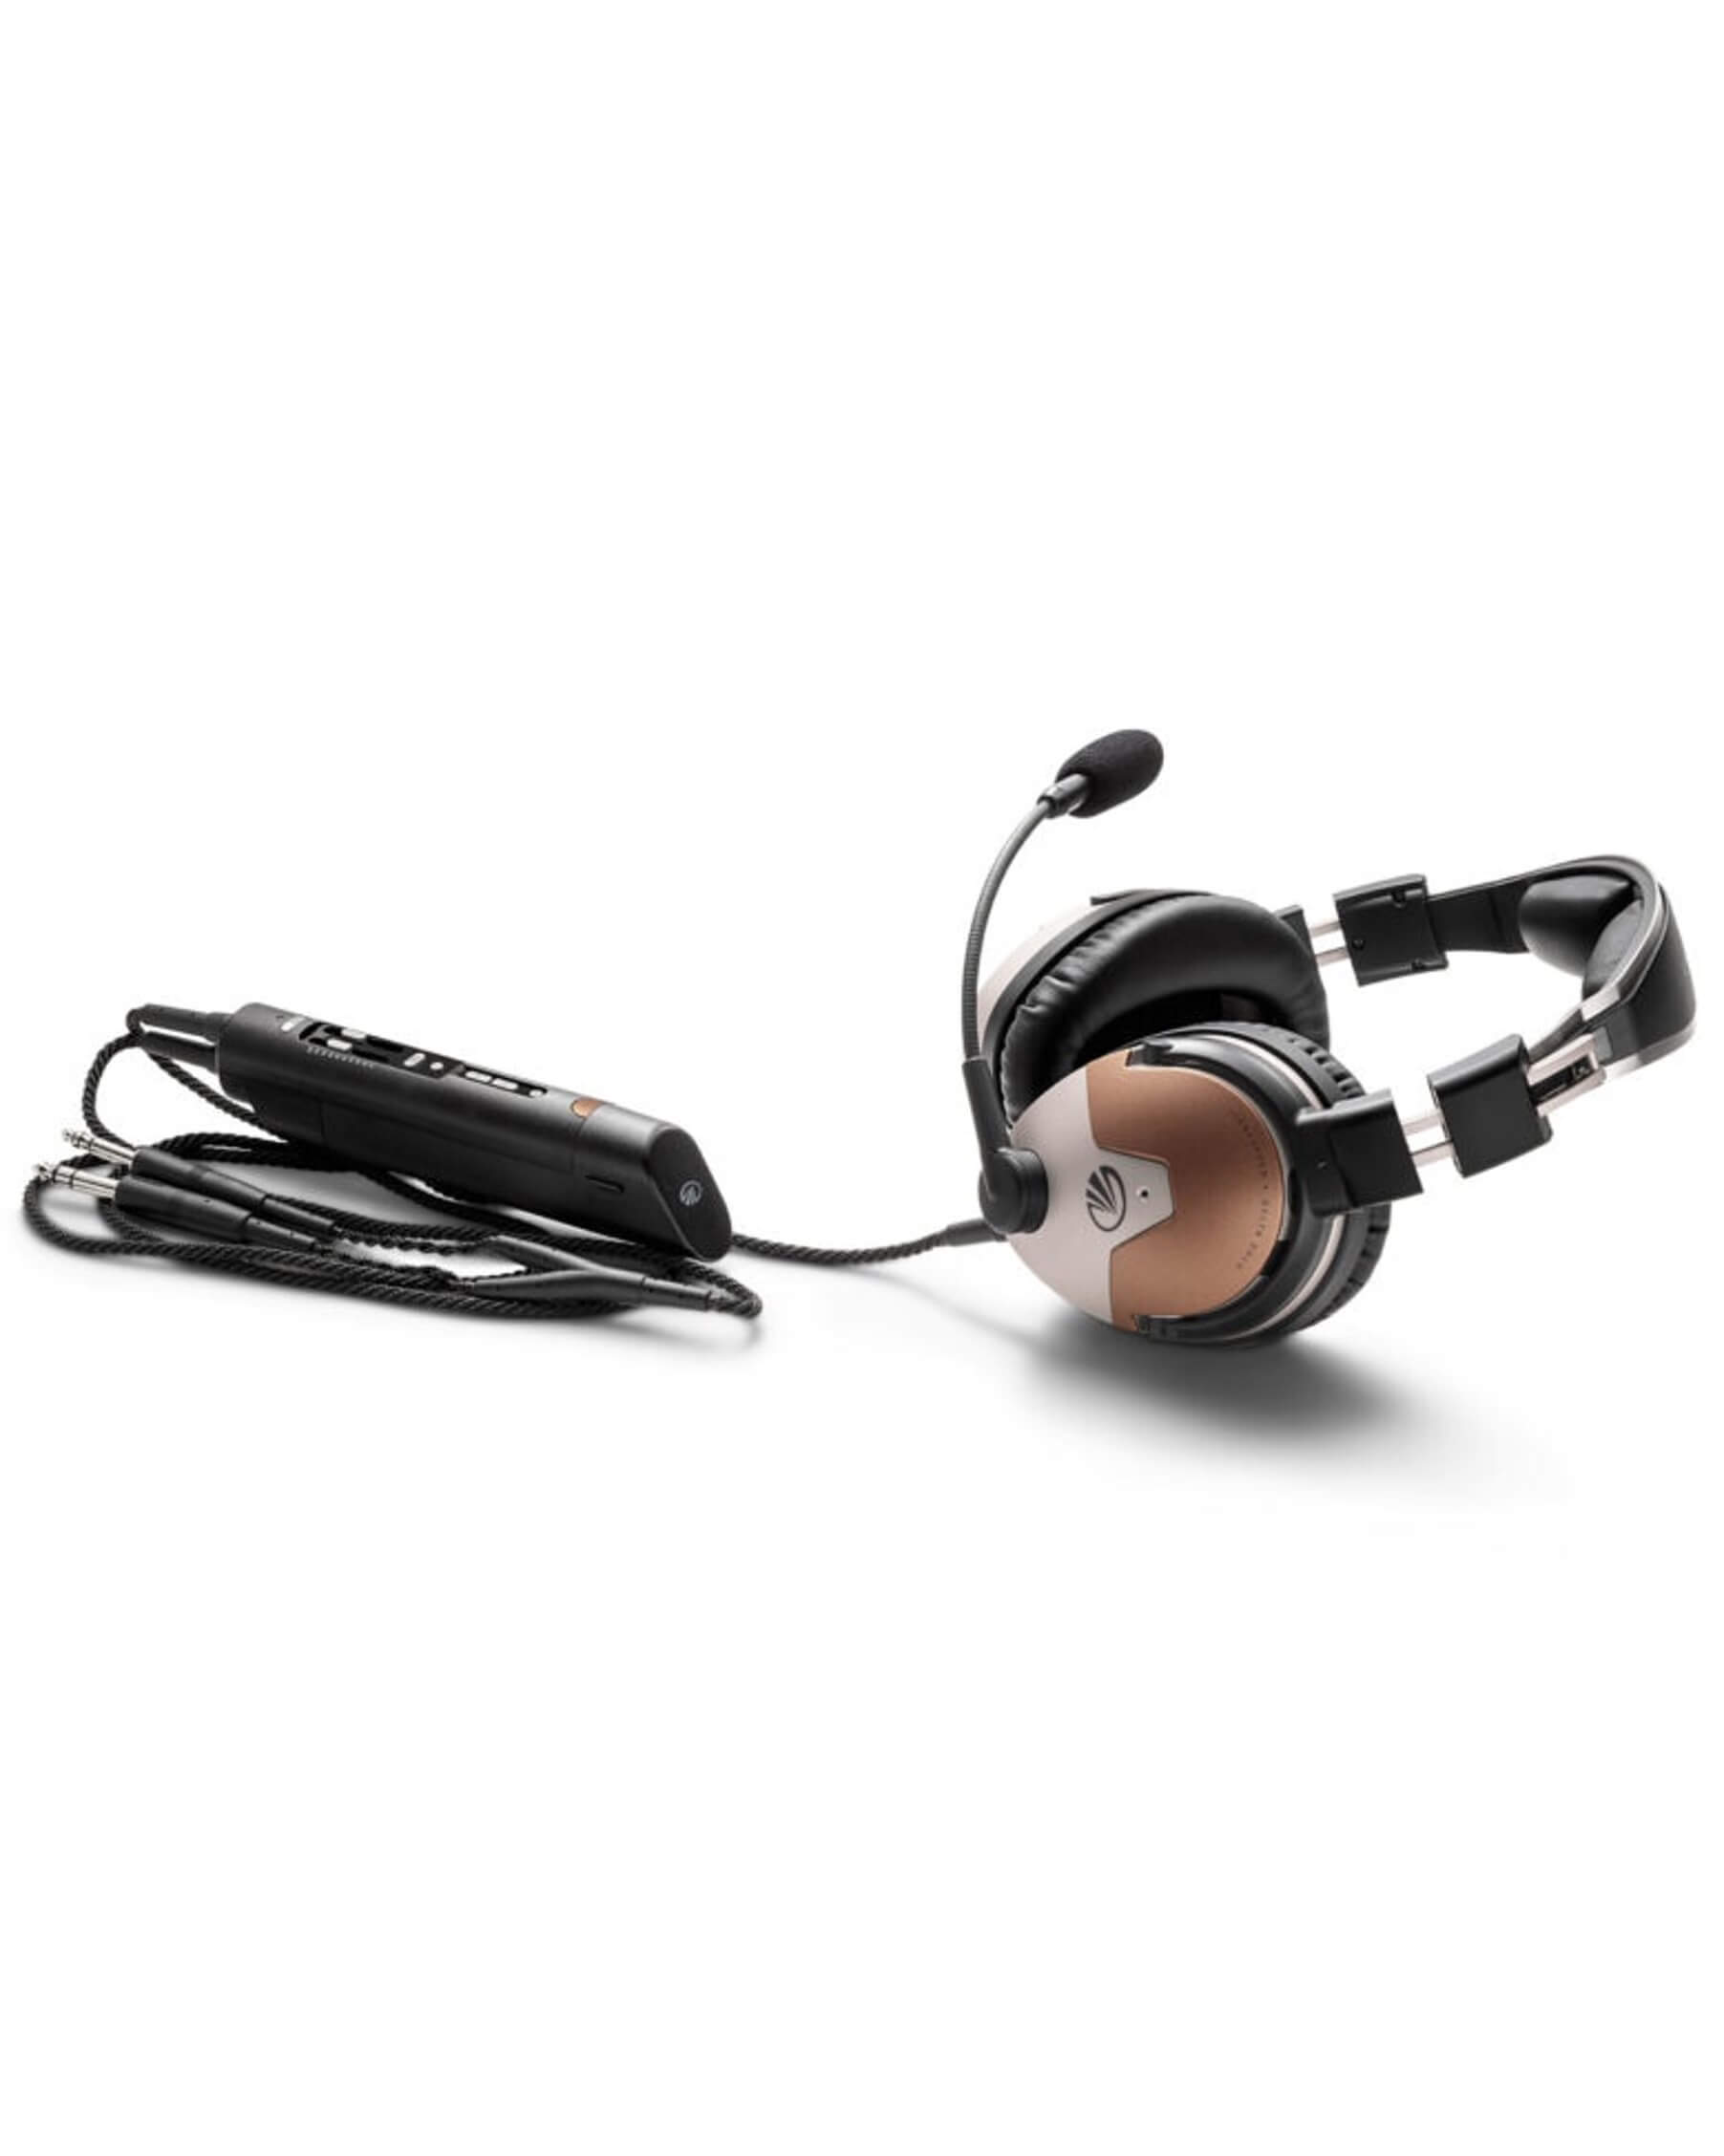 Lightspeed Delta Zulu ANR aviation headset with battery pack and full cord